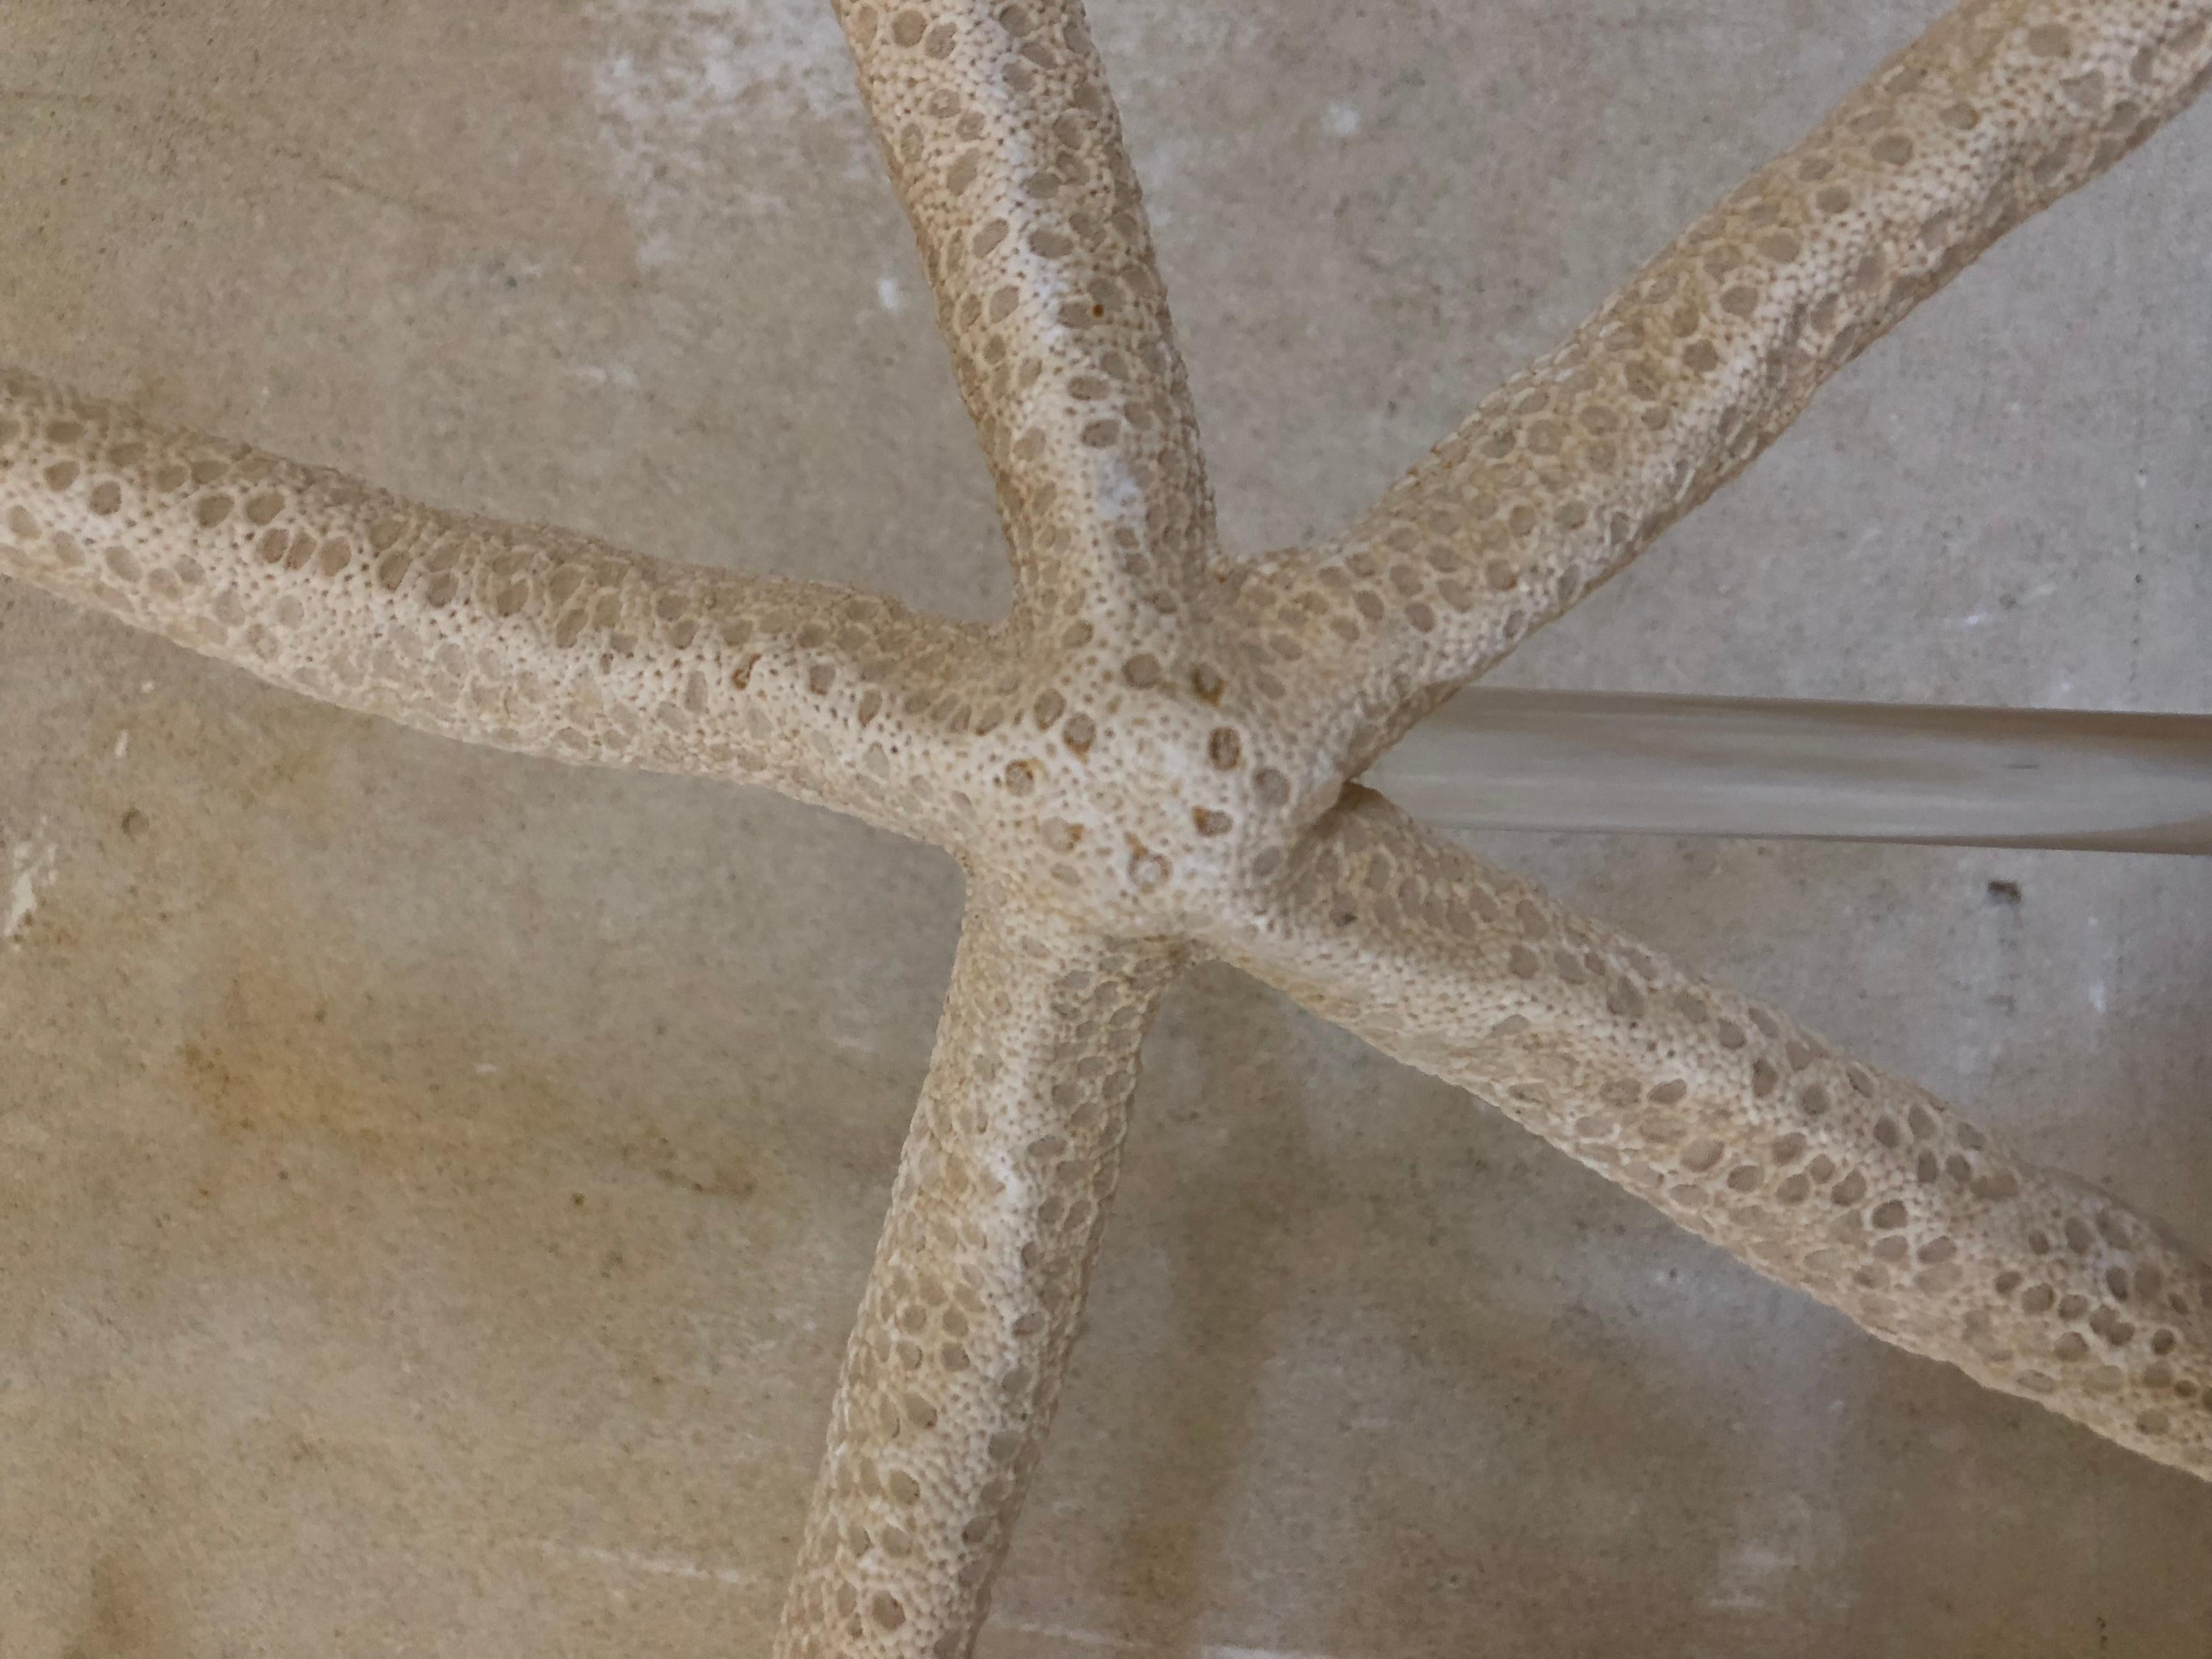 English Antique Giant Starfish For Sale